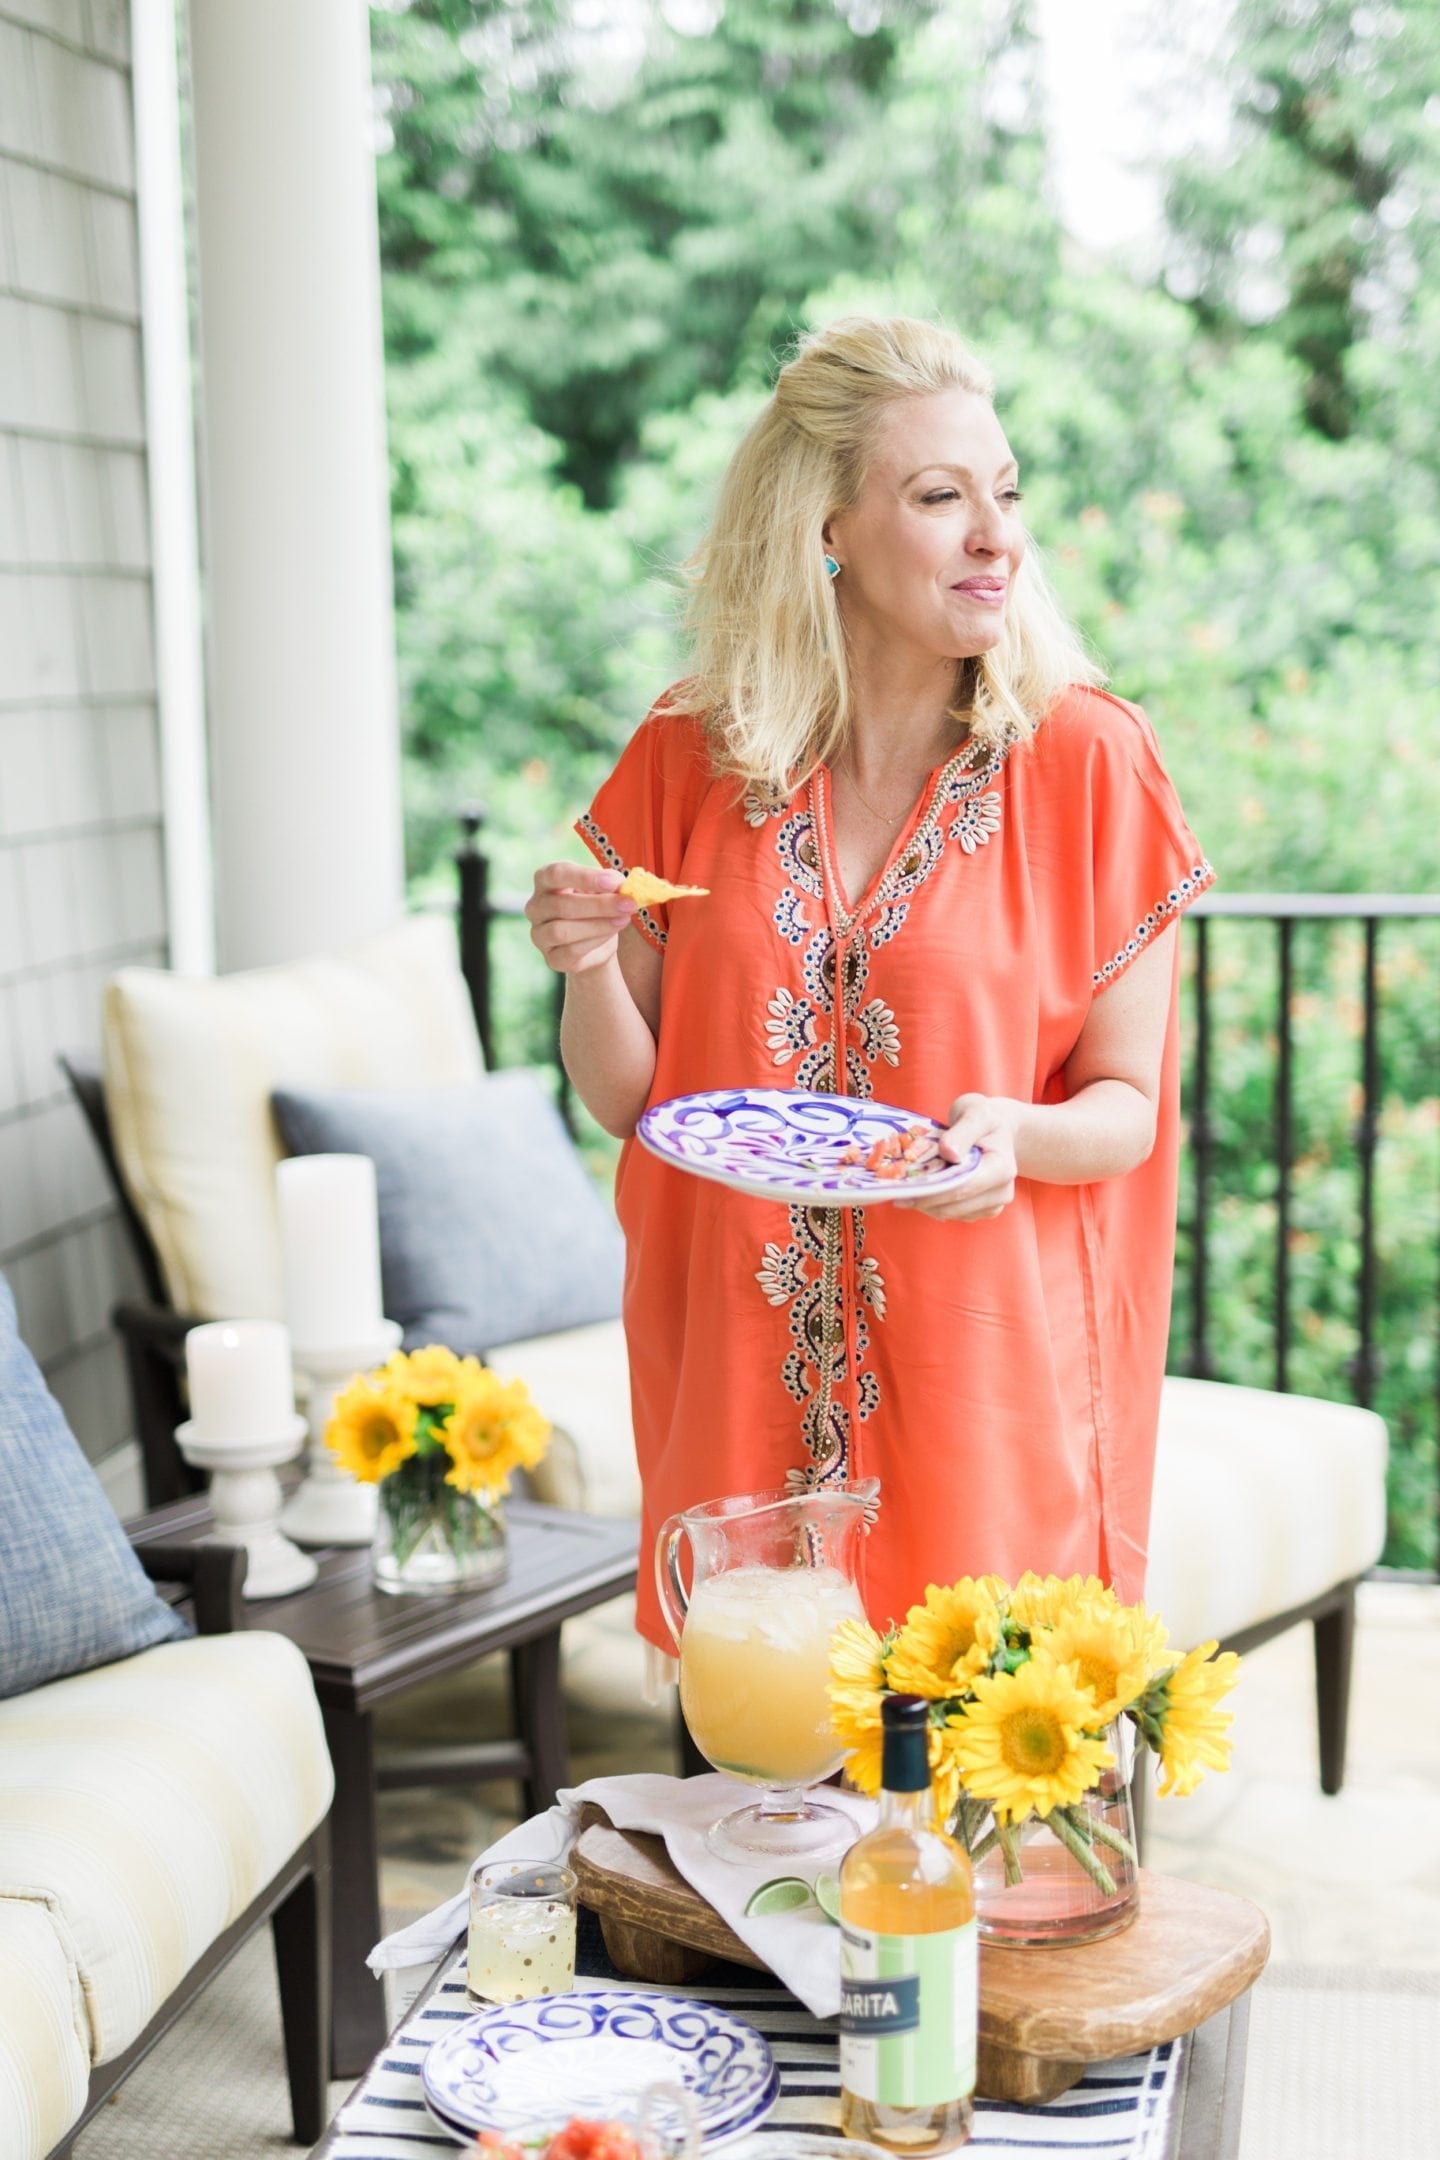 Cindo de Mayo patio party with coral bathing suit cover up and yellow sunflowers on blue and white table setting.